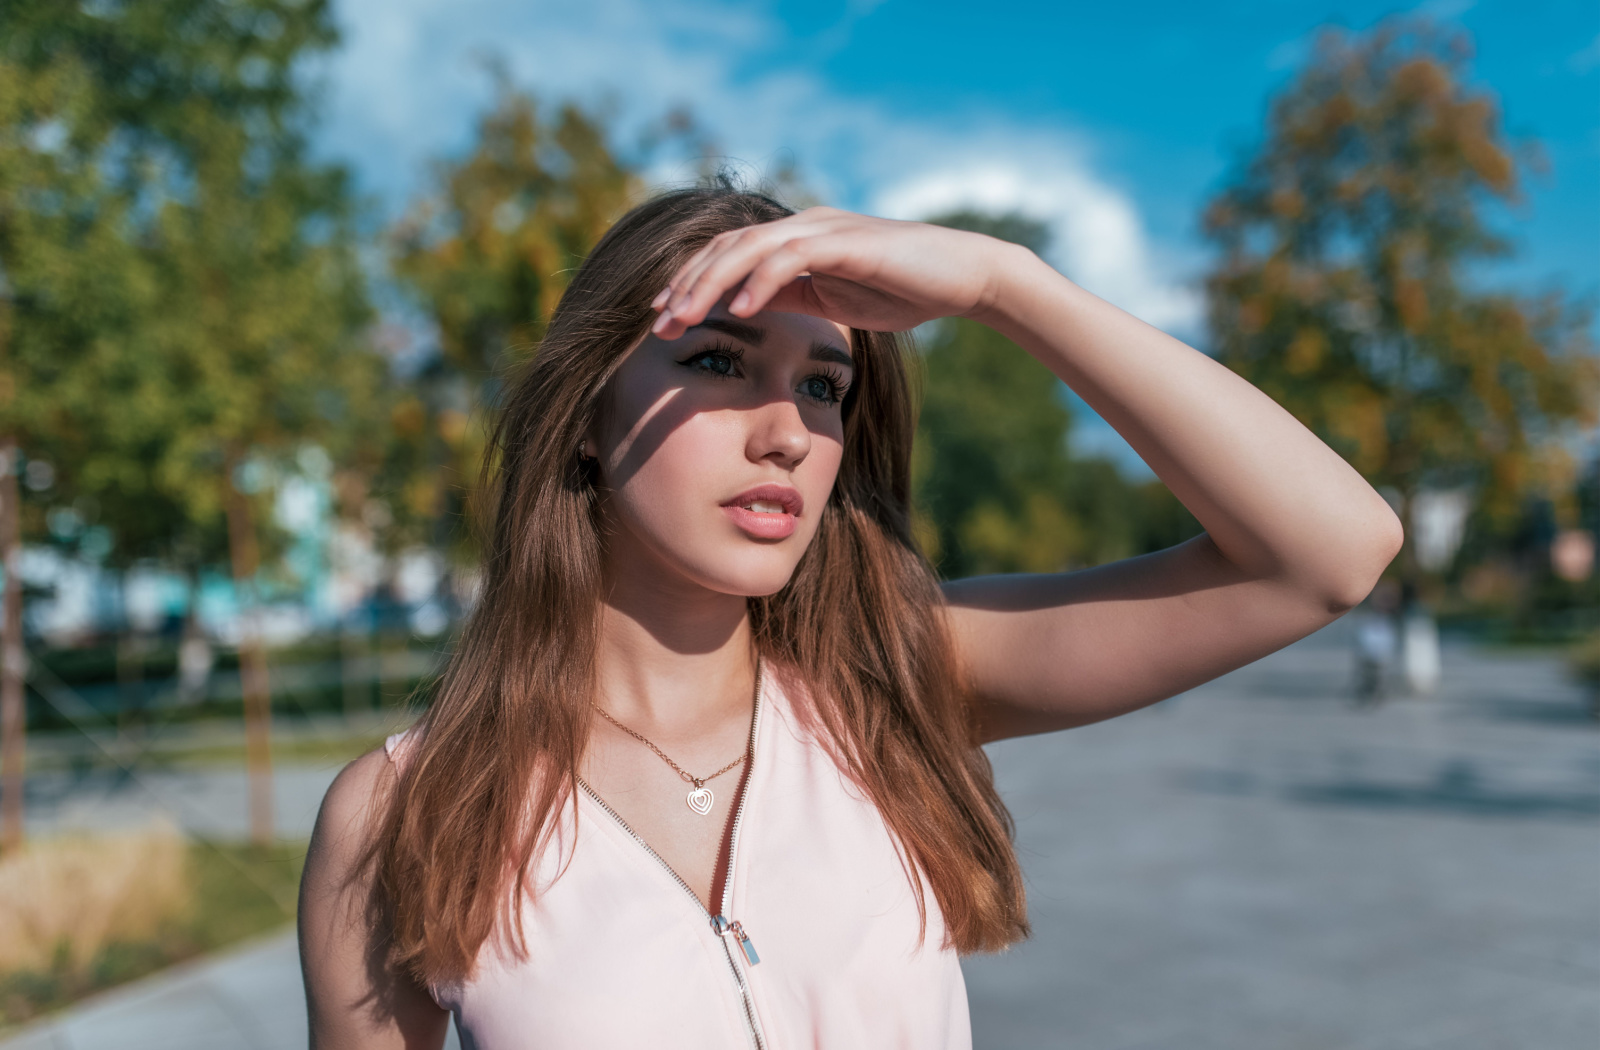 Girl outside putting her hand above her eyes to cover them from the sun.